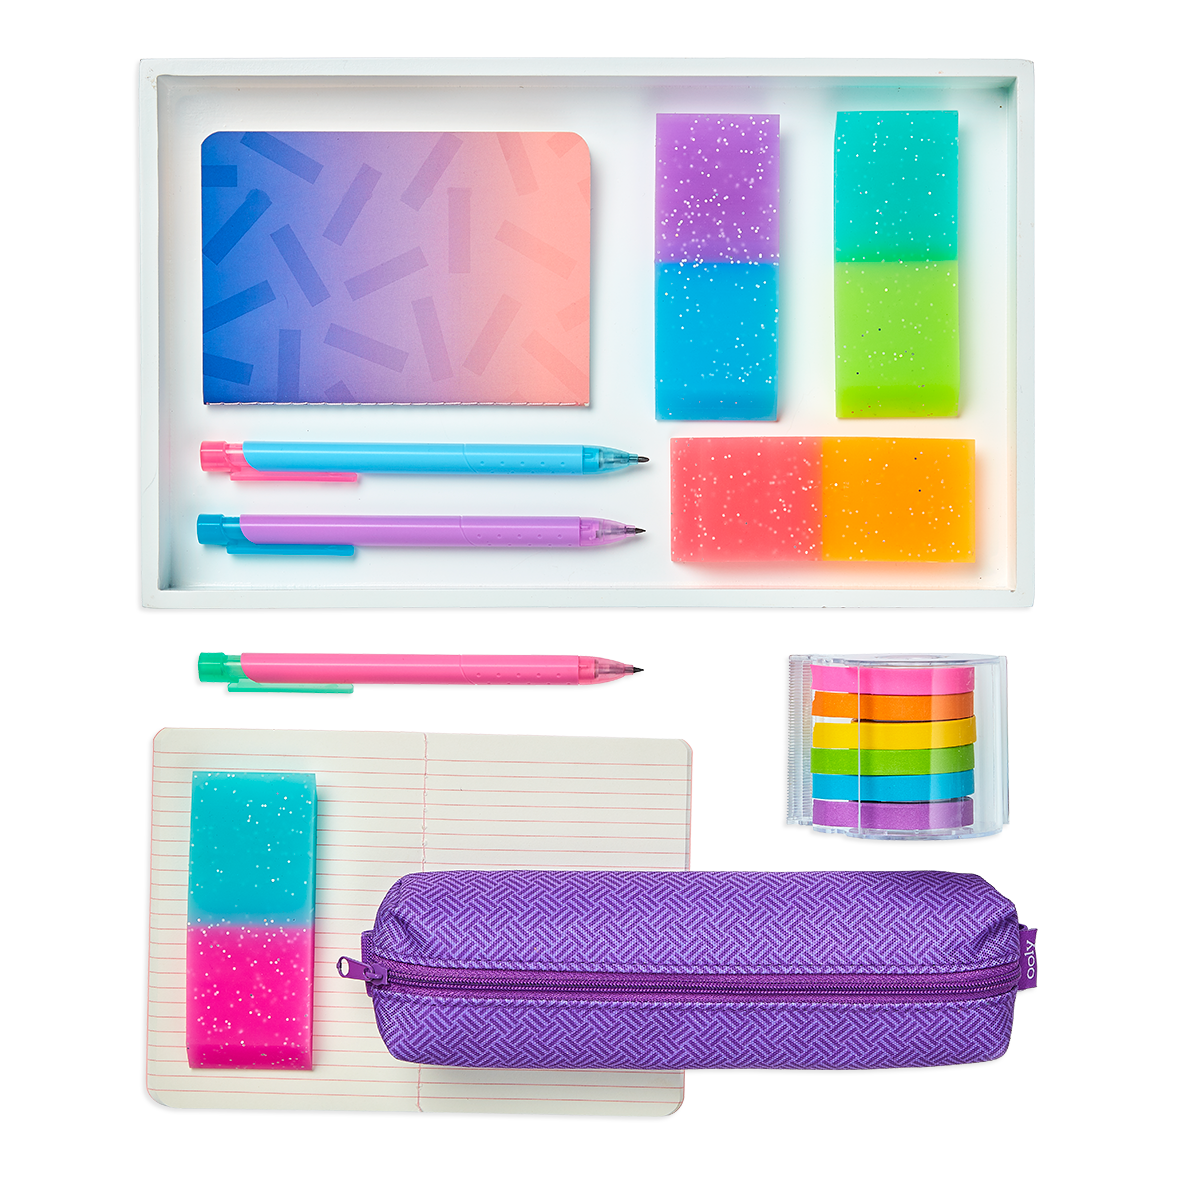 All 4 Oh My Glitter Jumbo Erasers shown with Oh My Ombre notebook and Oh My Ombre mechanical pencils and purple zipper pencil pouch